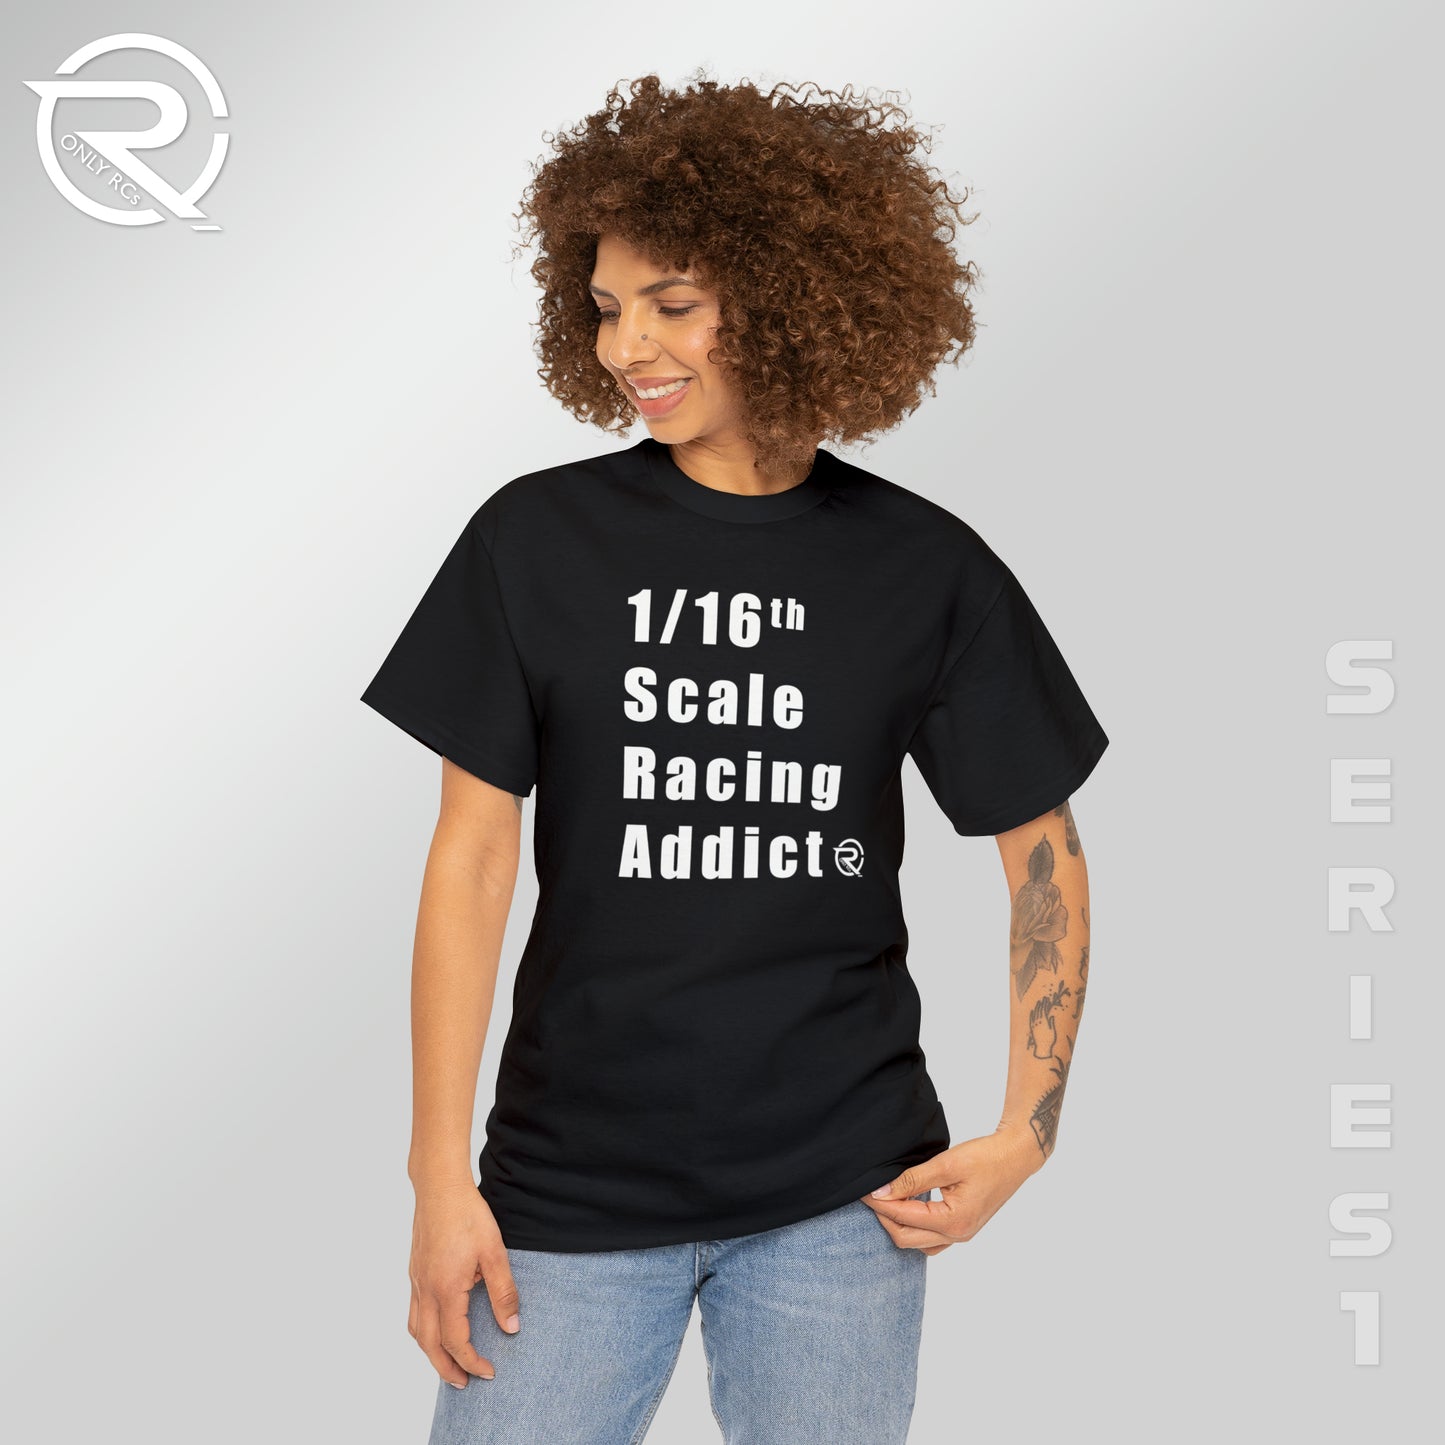 OnlyRCs - 1/16th Scale Racing Addict Heavy Cotton Tee - Series 1